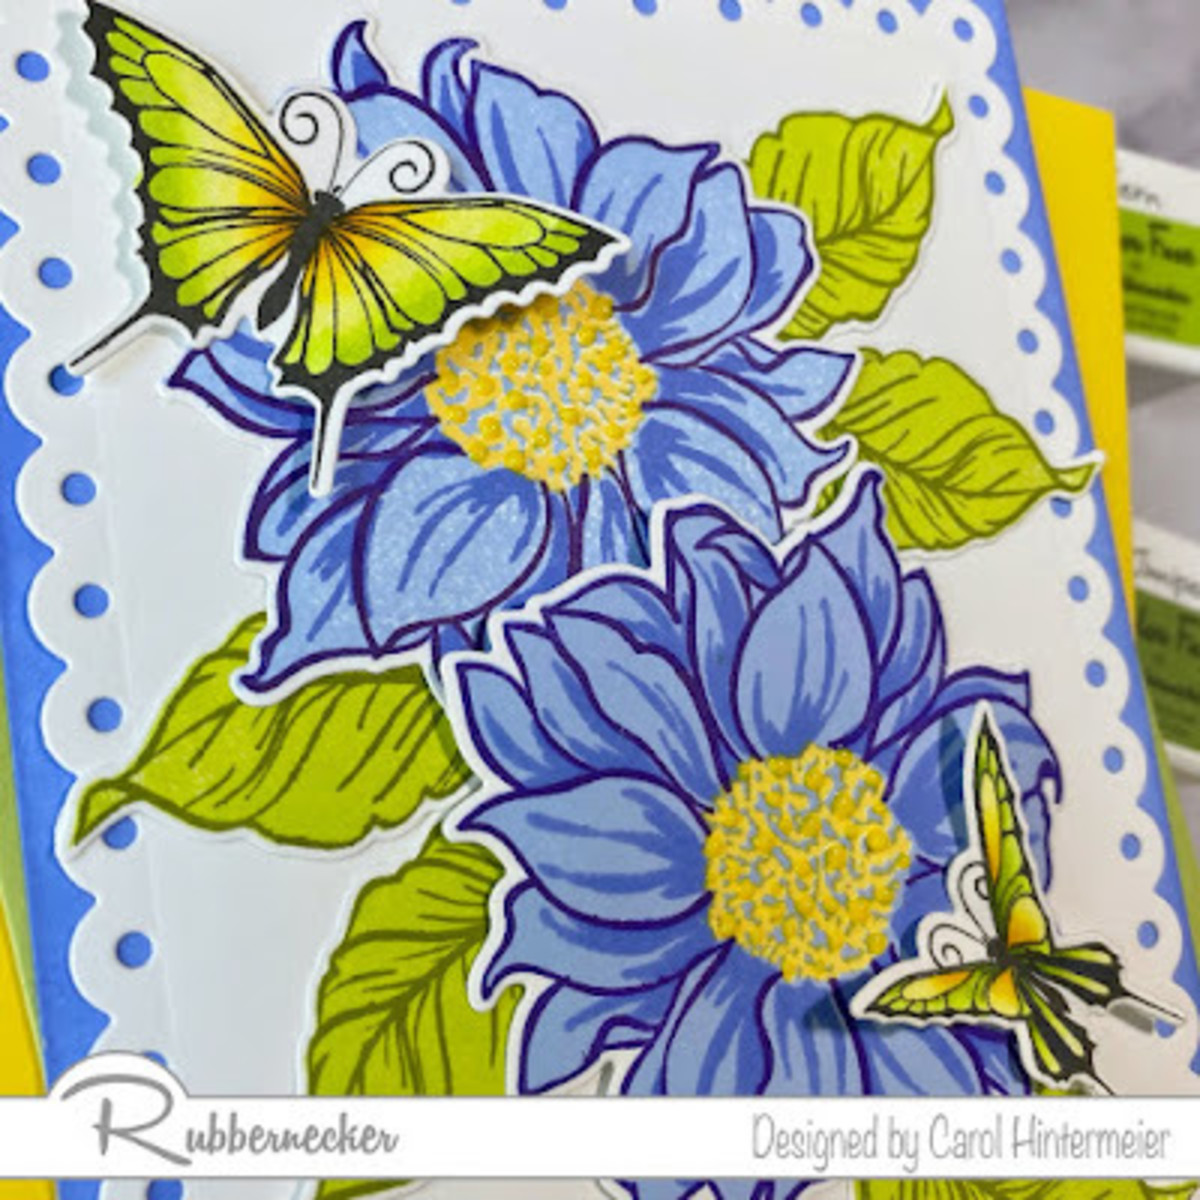 Bright colorful tones make this layered card bright and cheerful